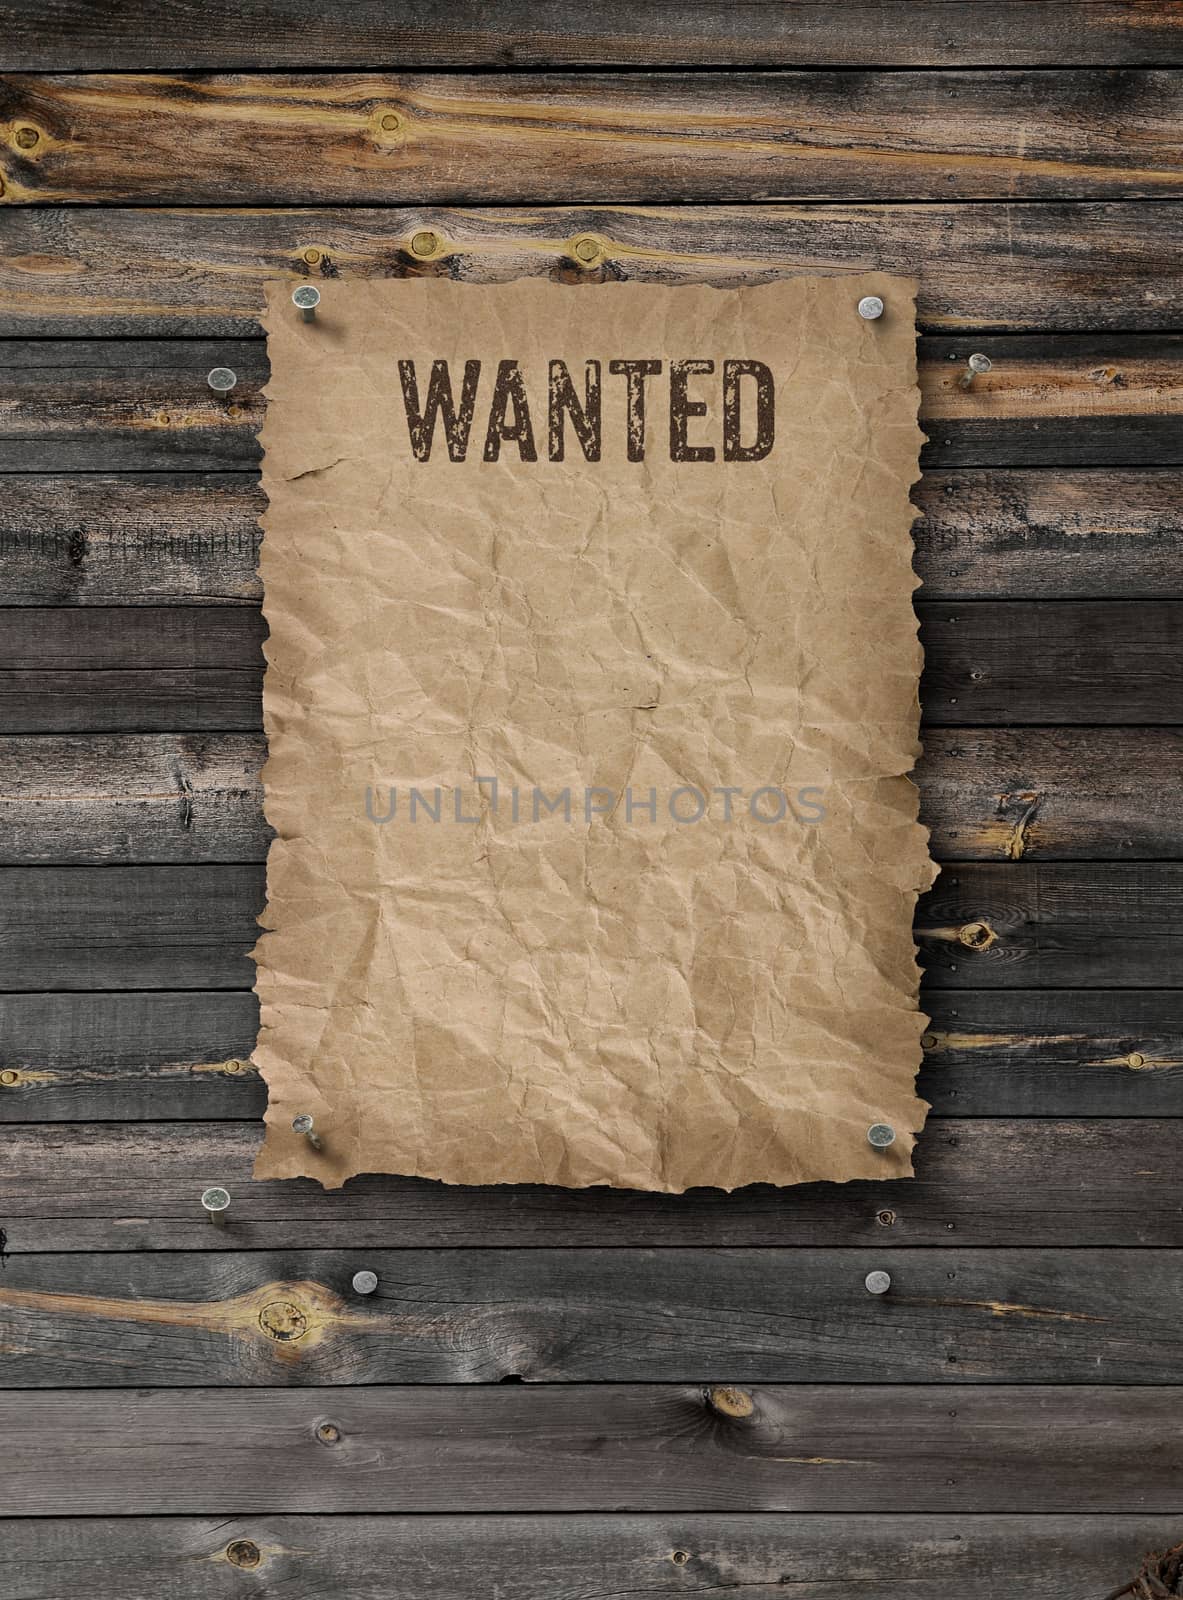 Wanted poster on weathered plank wood wall by anterovium